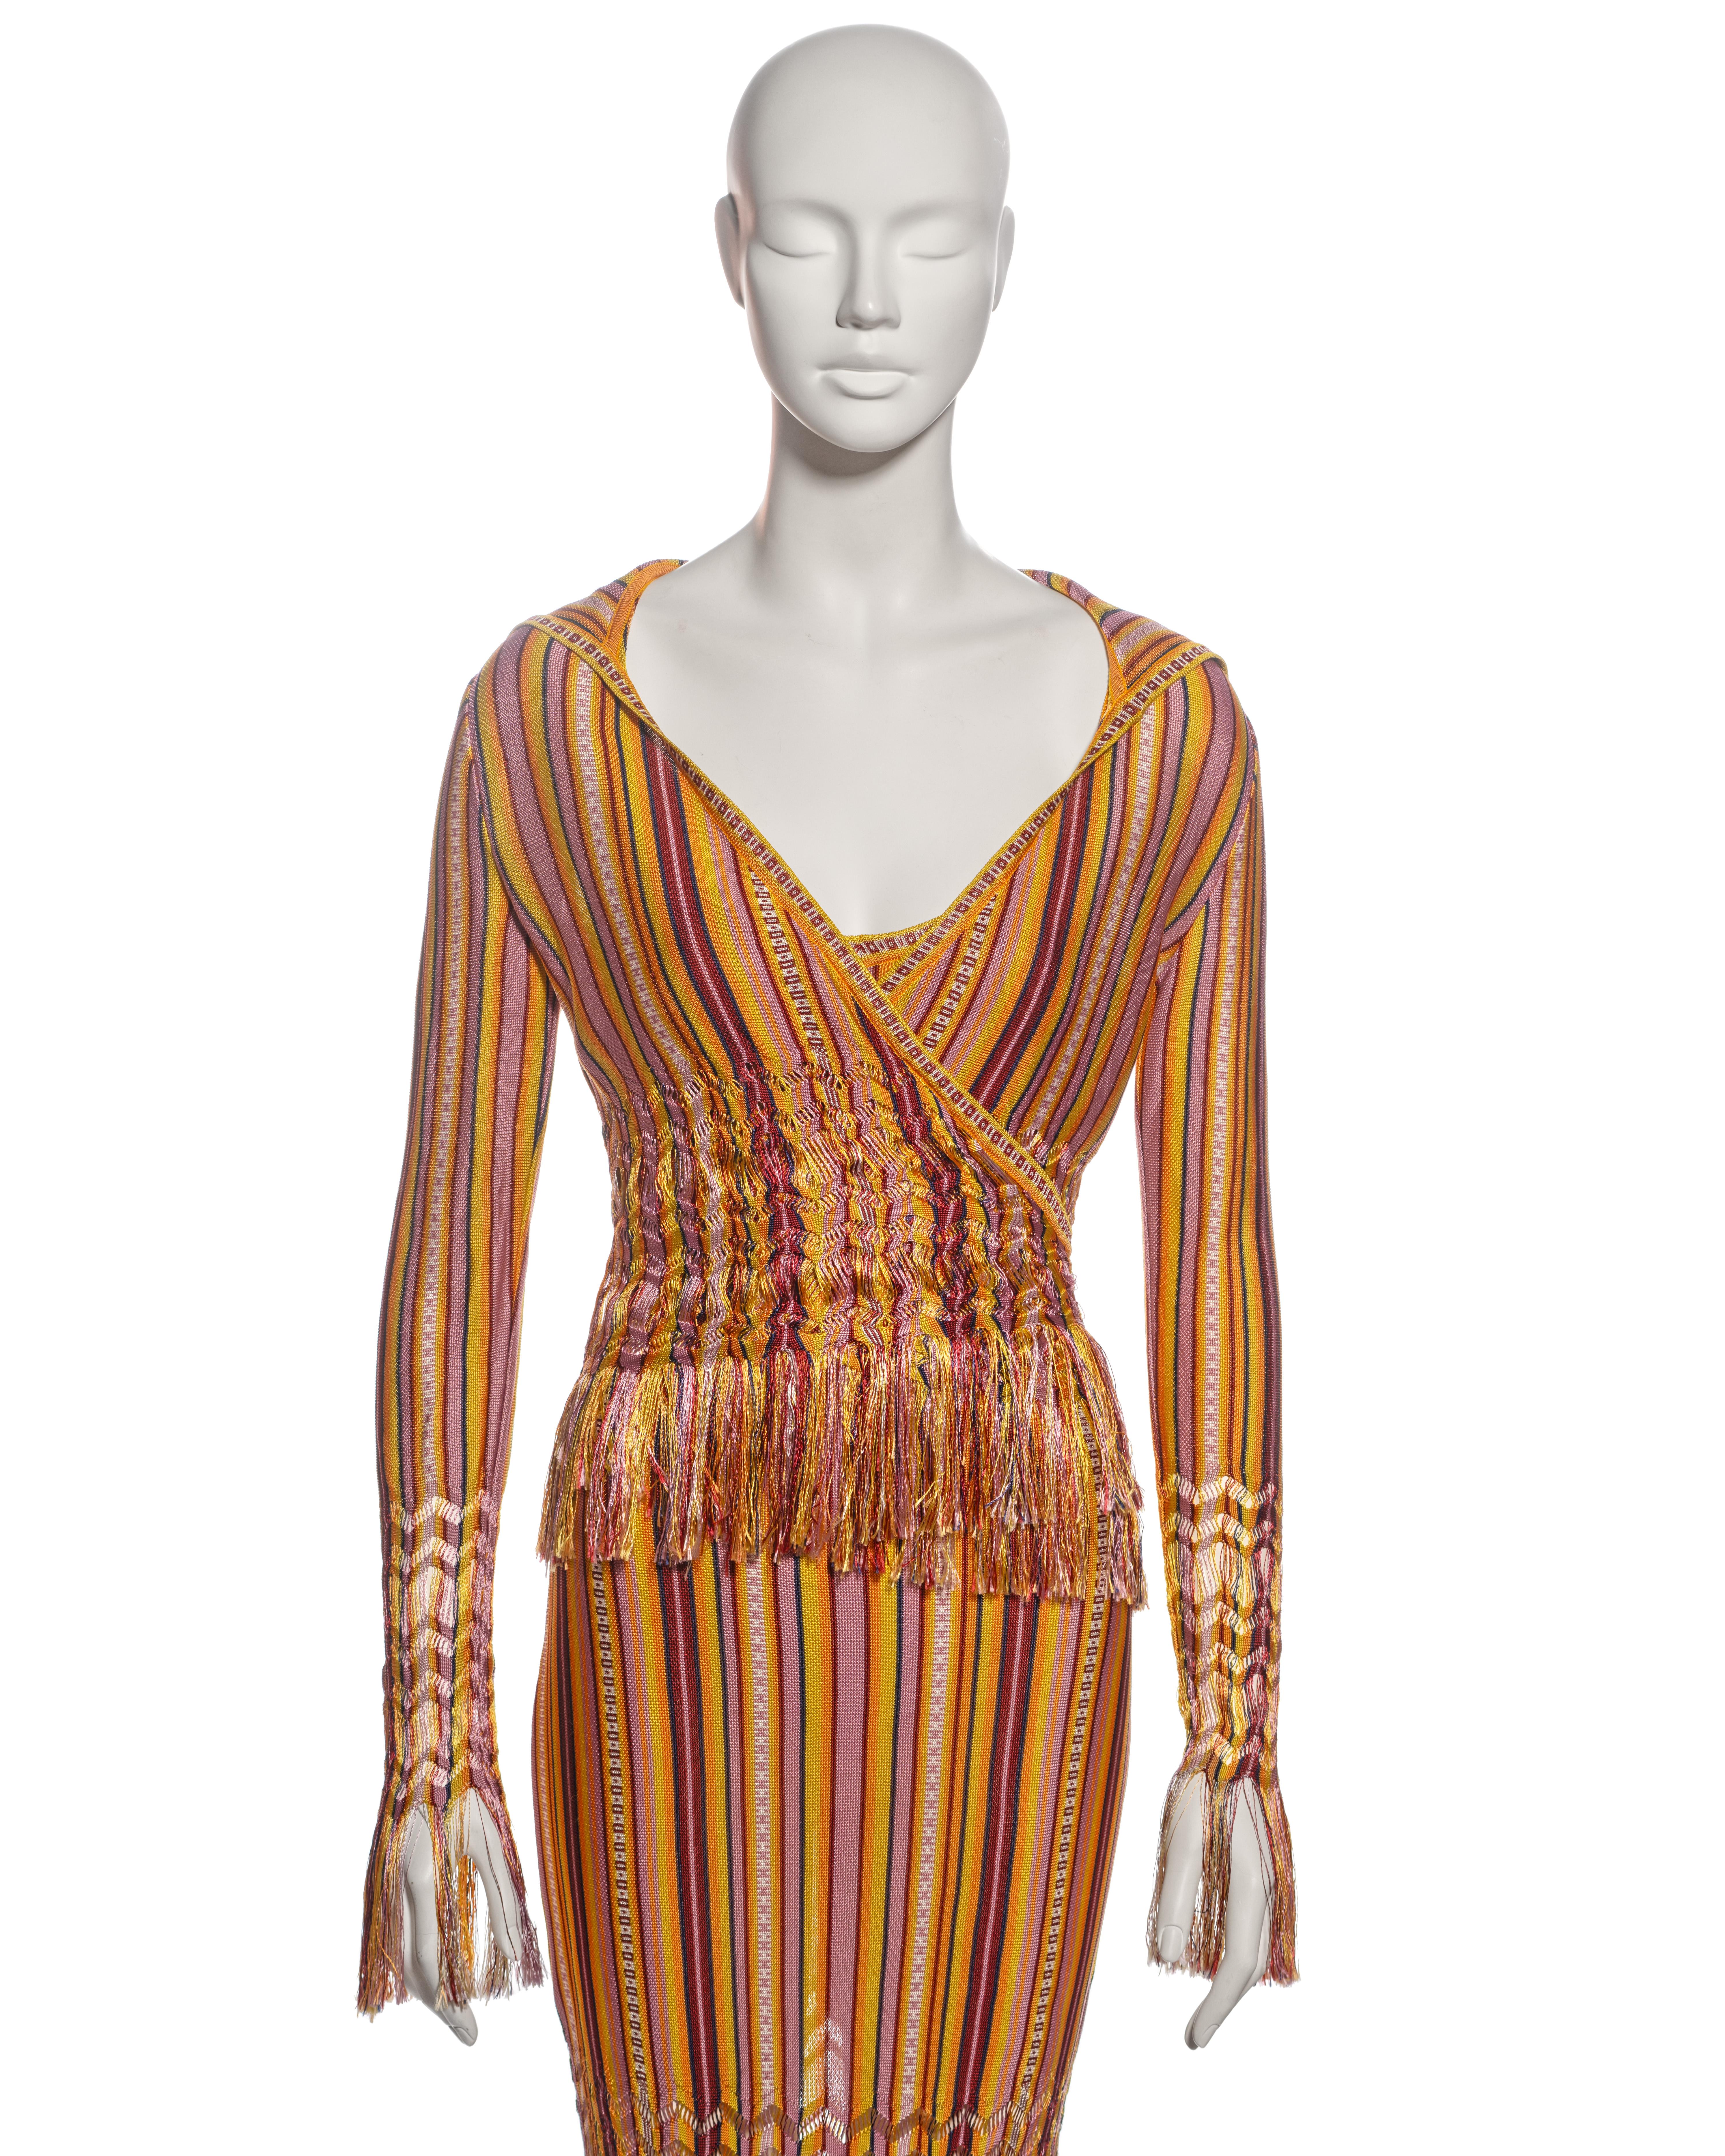 Women's Christian Dior by John Galliano Striped Knit Maxi Dress and Cardigan, ss 2002 For Sale